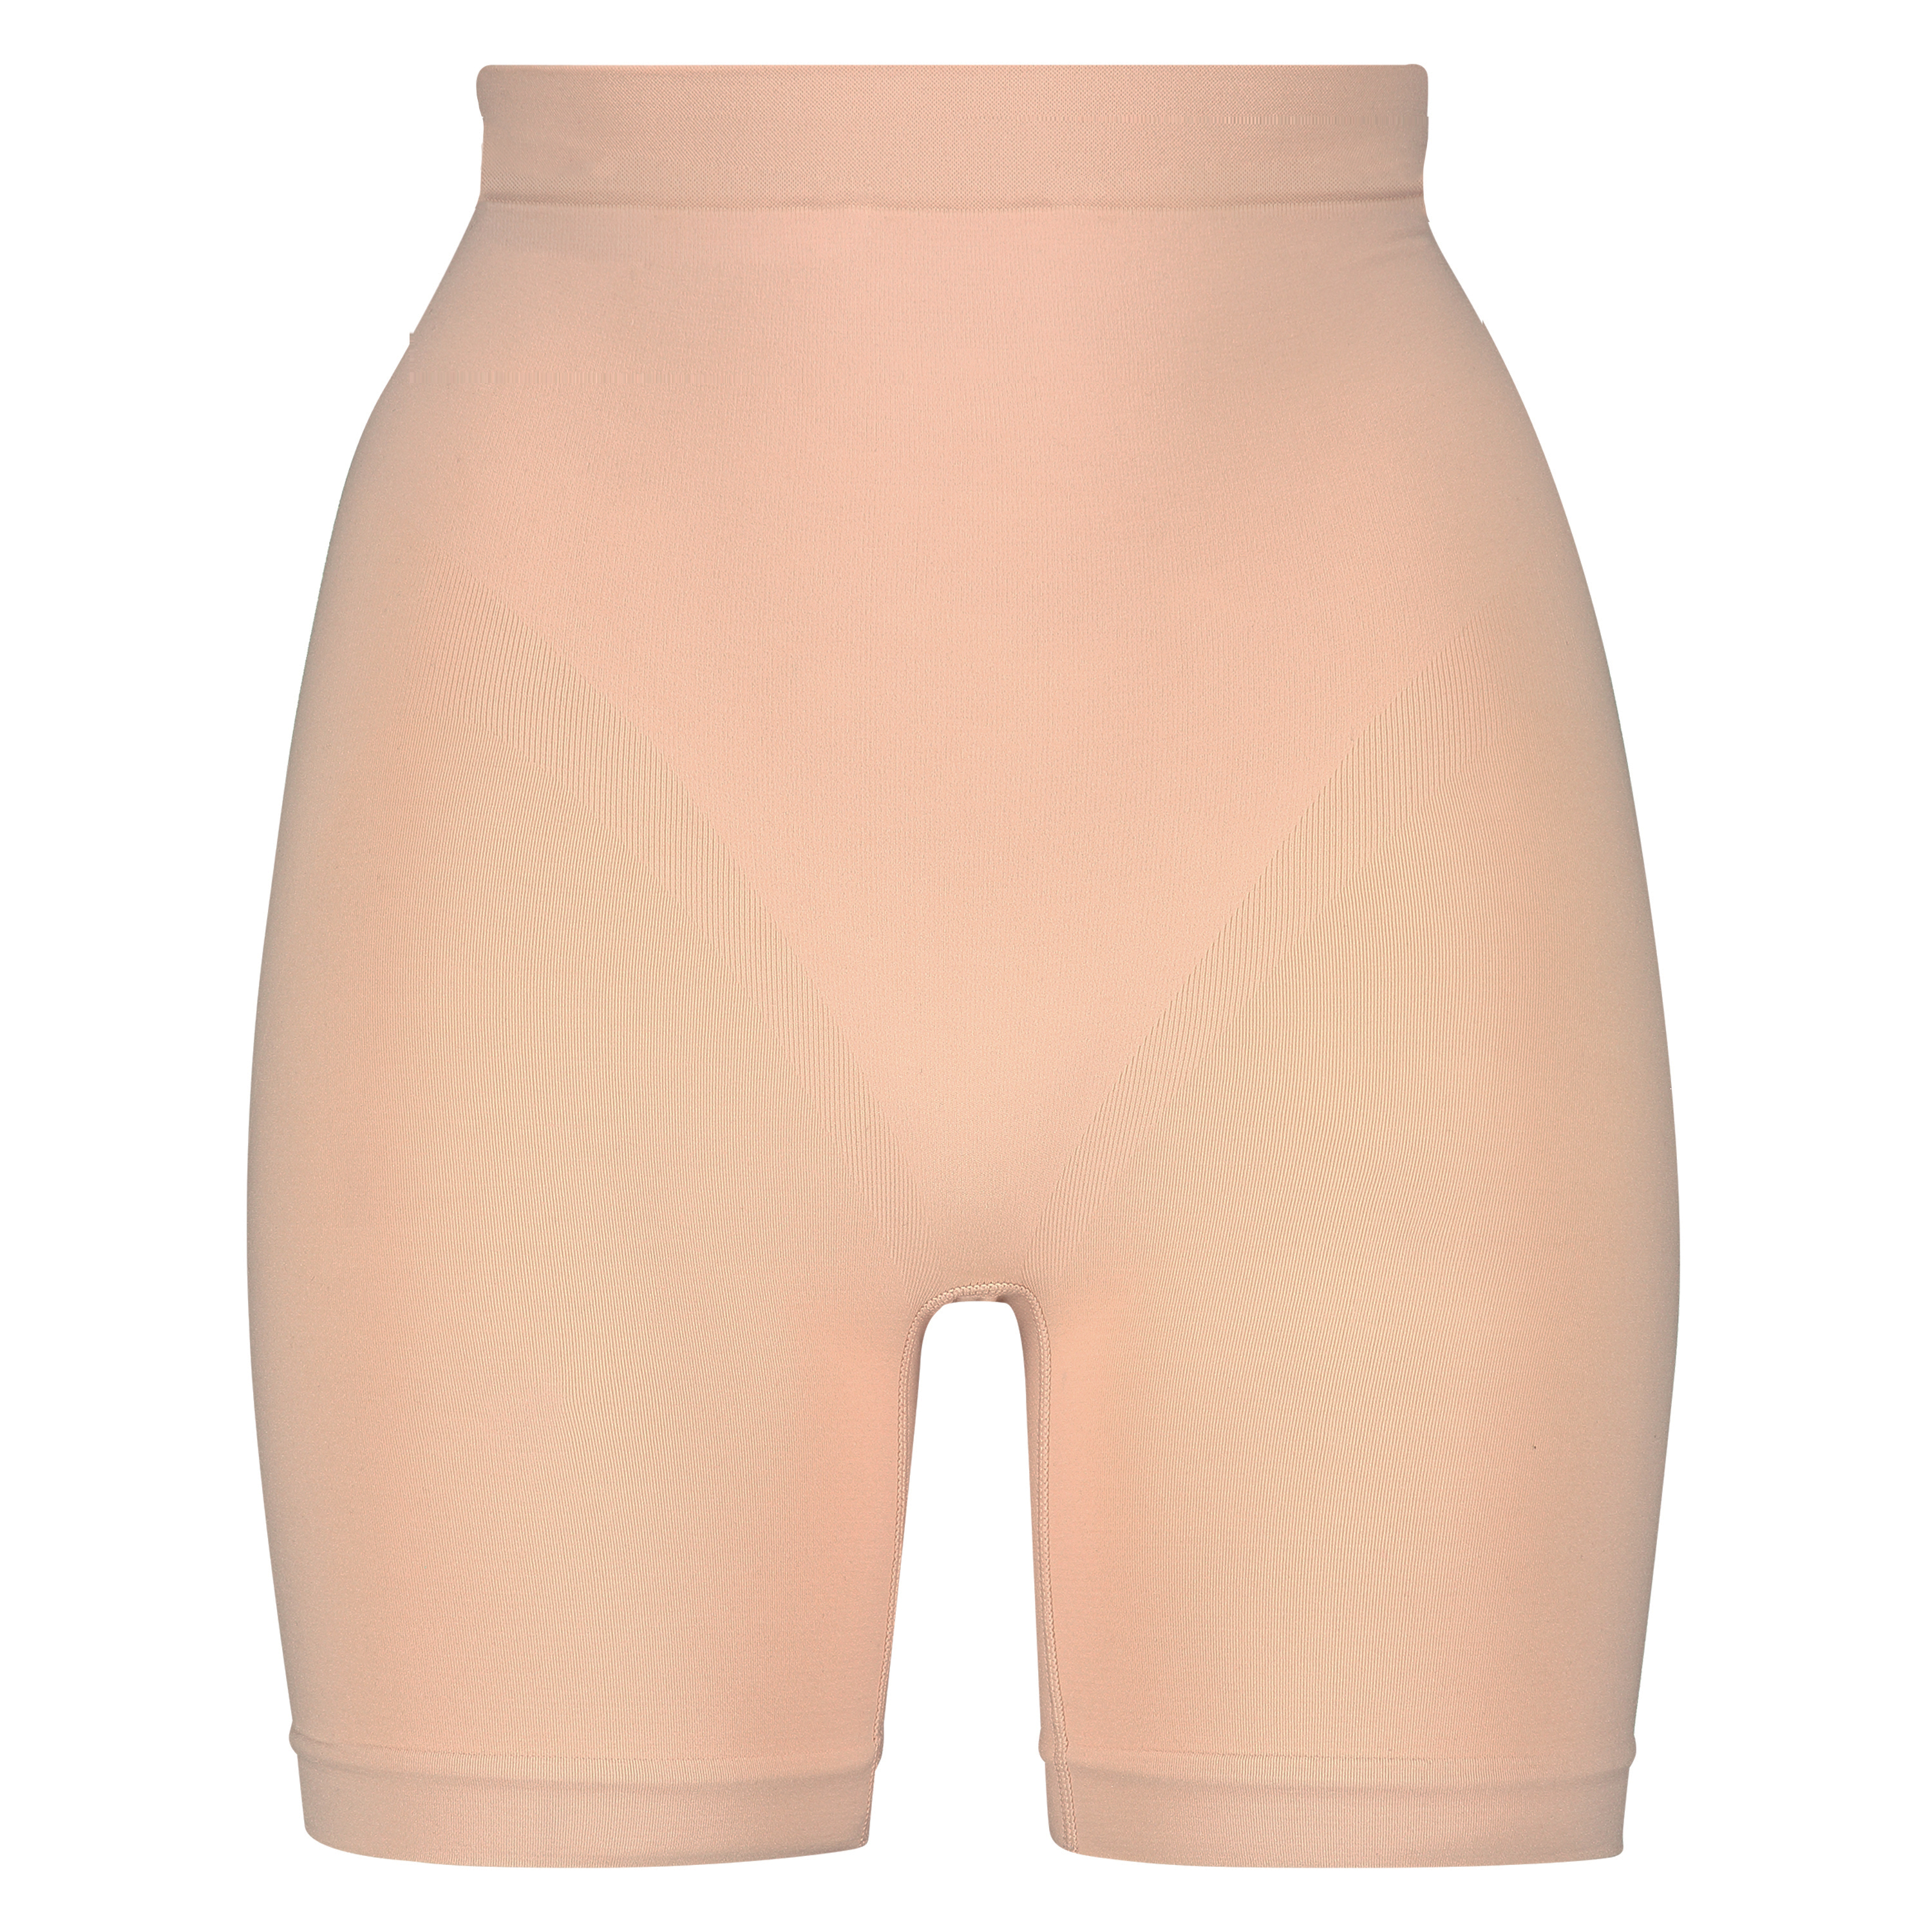 Firming high waisted thigh slimmer - Level 2, Beżowy, main